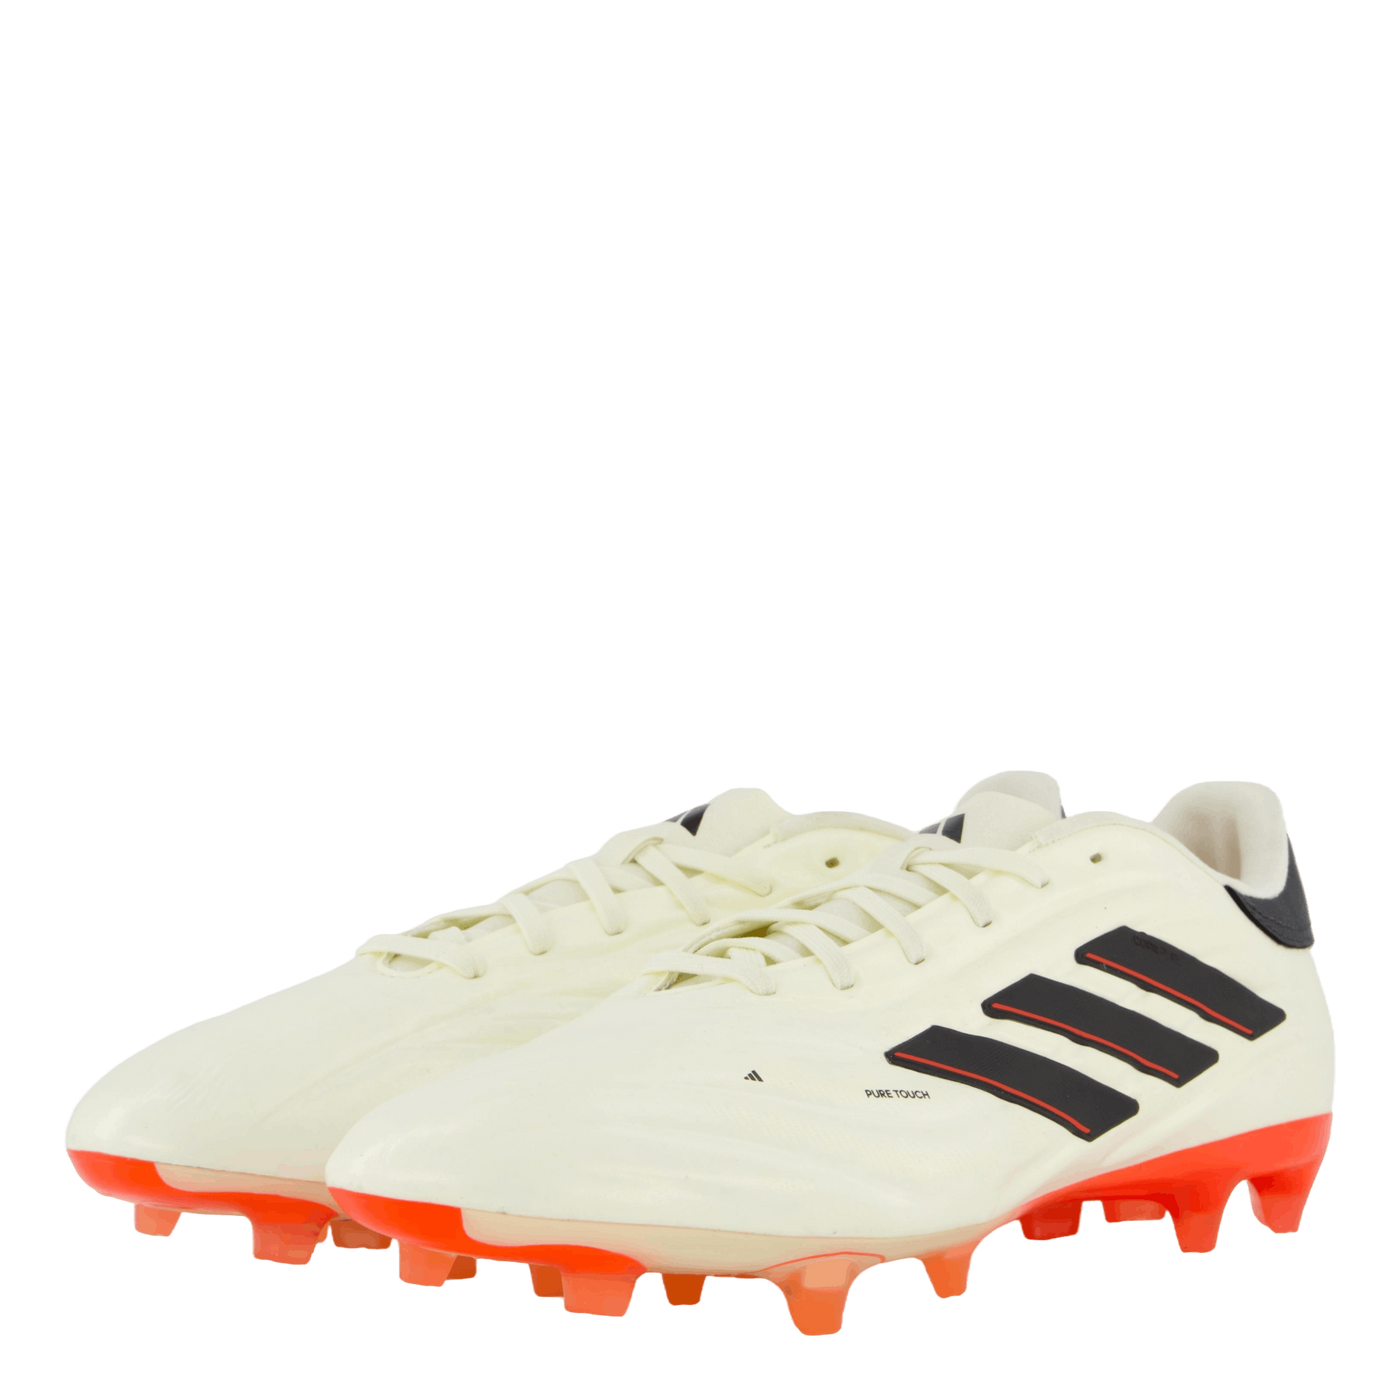 Copa Pure II Pro Firm Ground Boots Ivory / Core Black / Solar Red